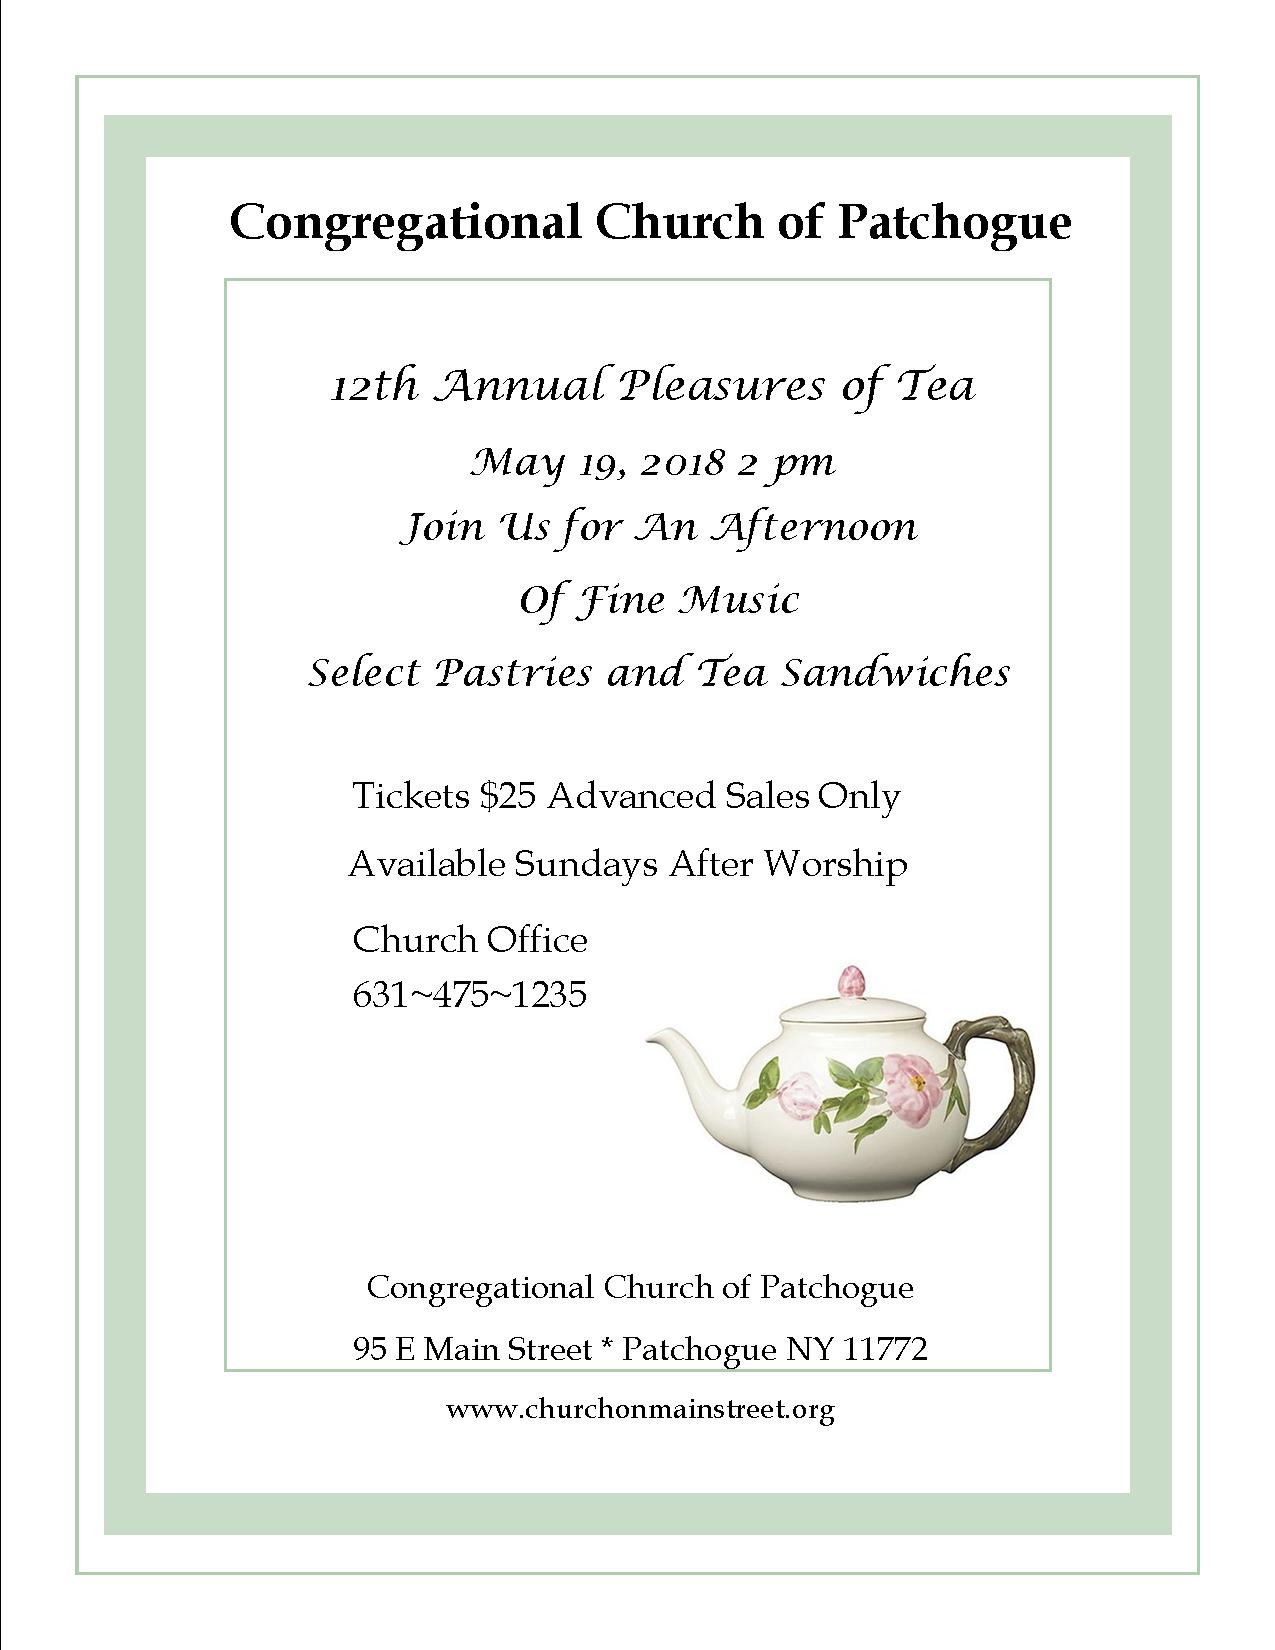 12th Annual Pleasures of Tea @ Congregational Church of Patchogue